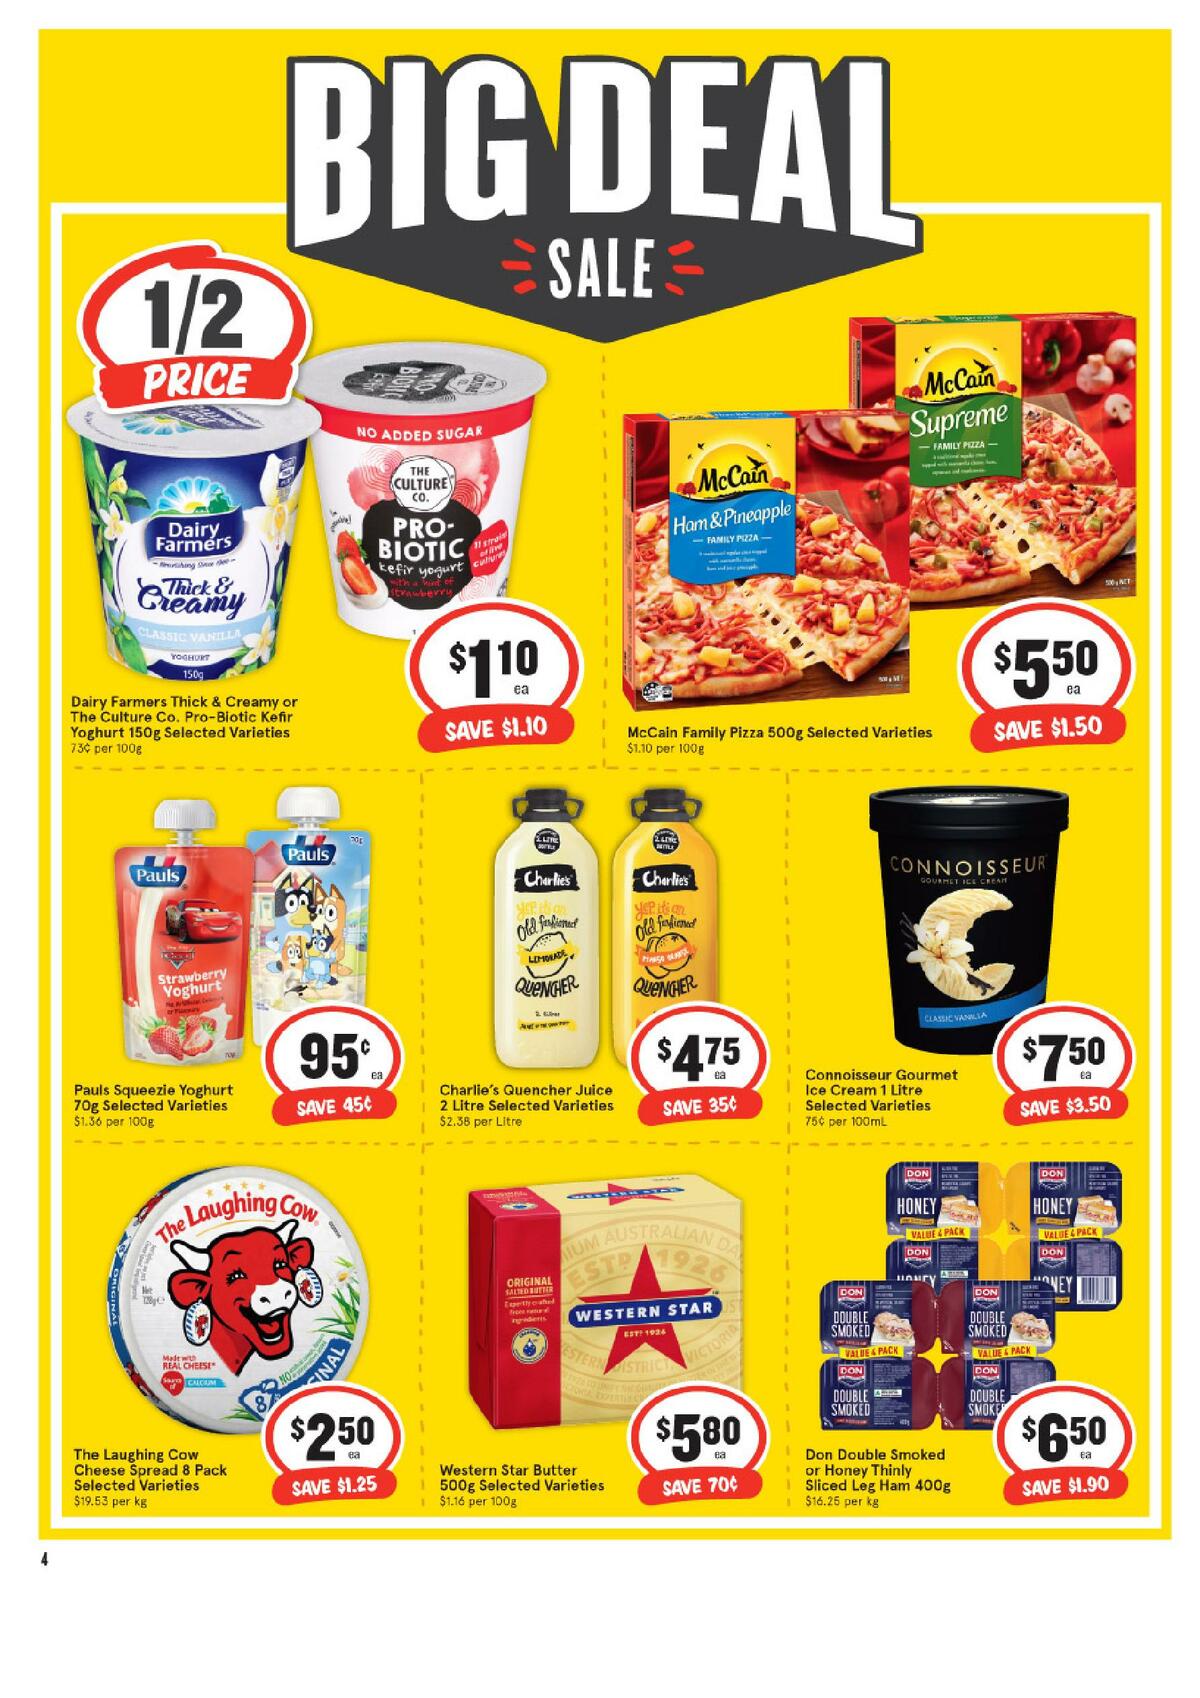 IGA Catalogues from 3 March